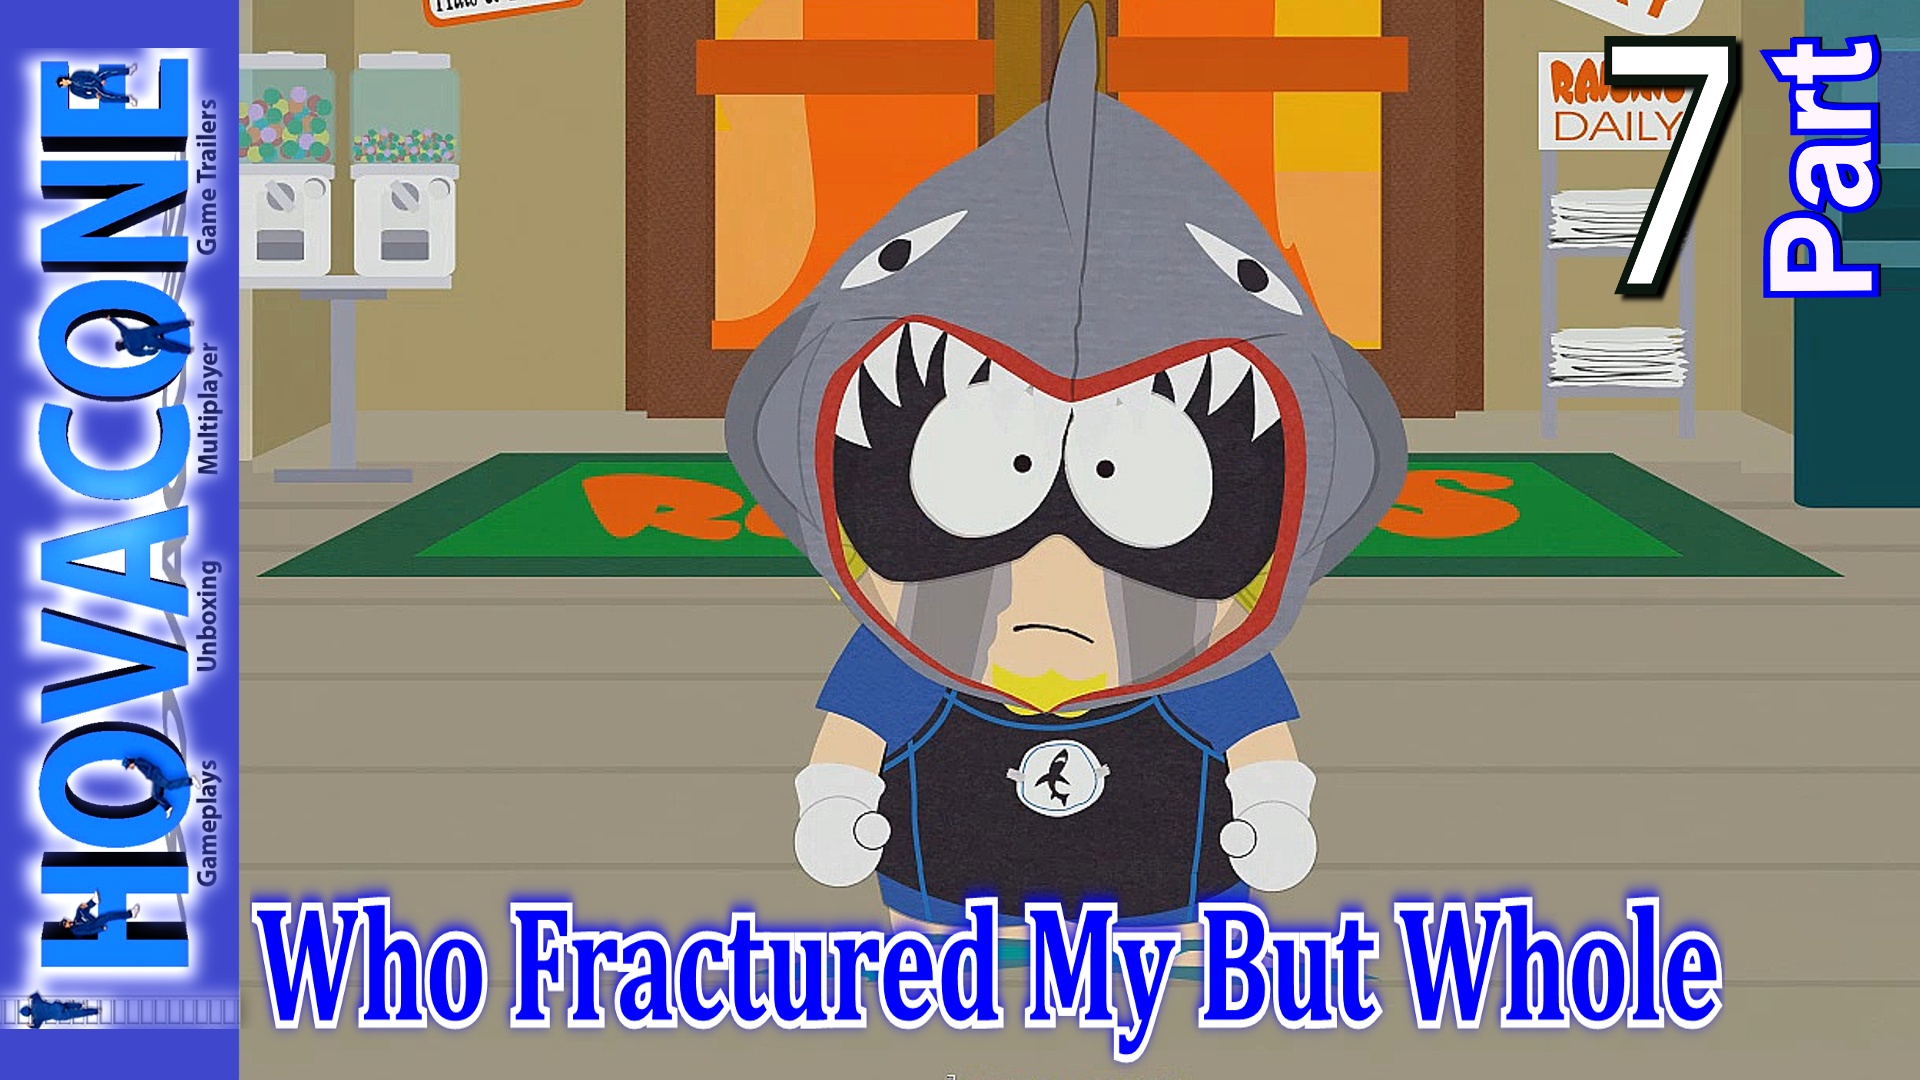 free south park fractured but whole steam keys